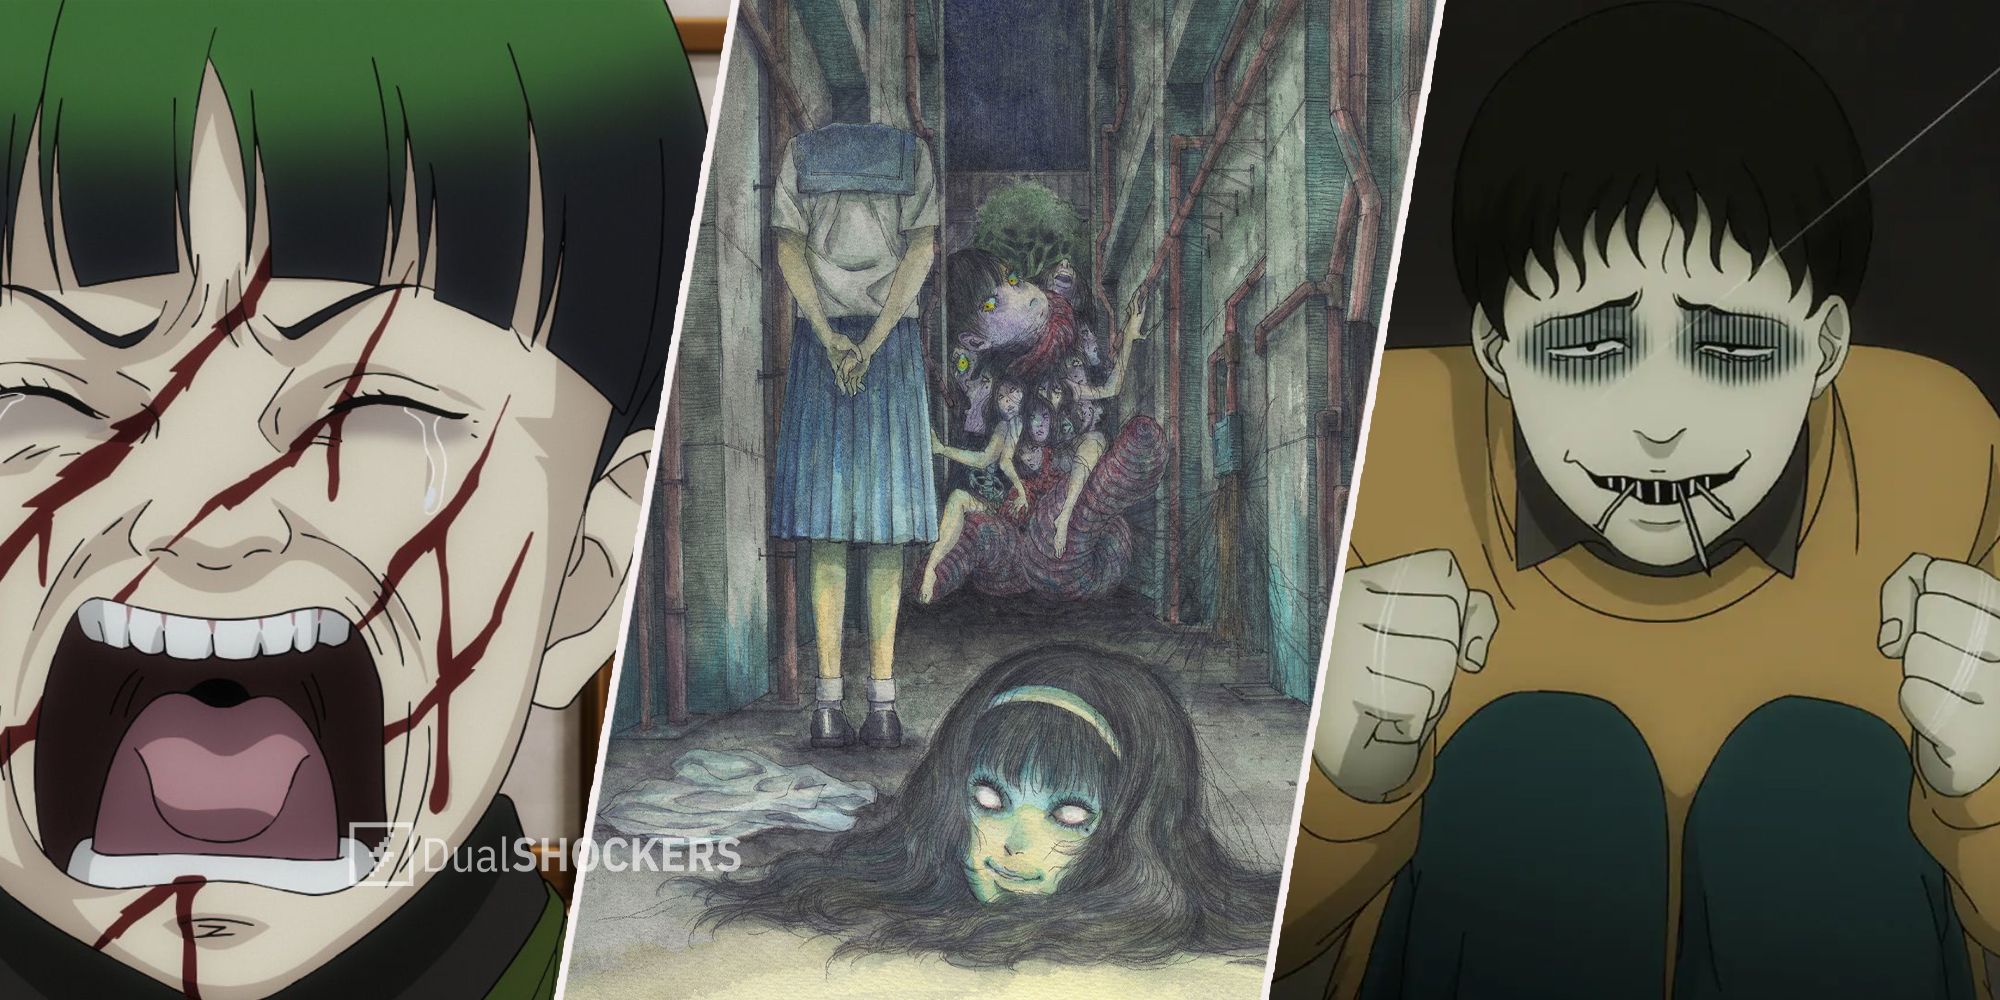 Netflix's “Junji Ito Maniac: Japanese Tales of the Macabre” Clip Reveals  More Adapted Tales and Release Date - Bloody Disgusting